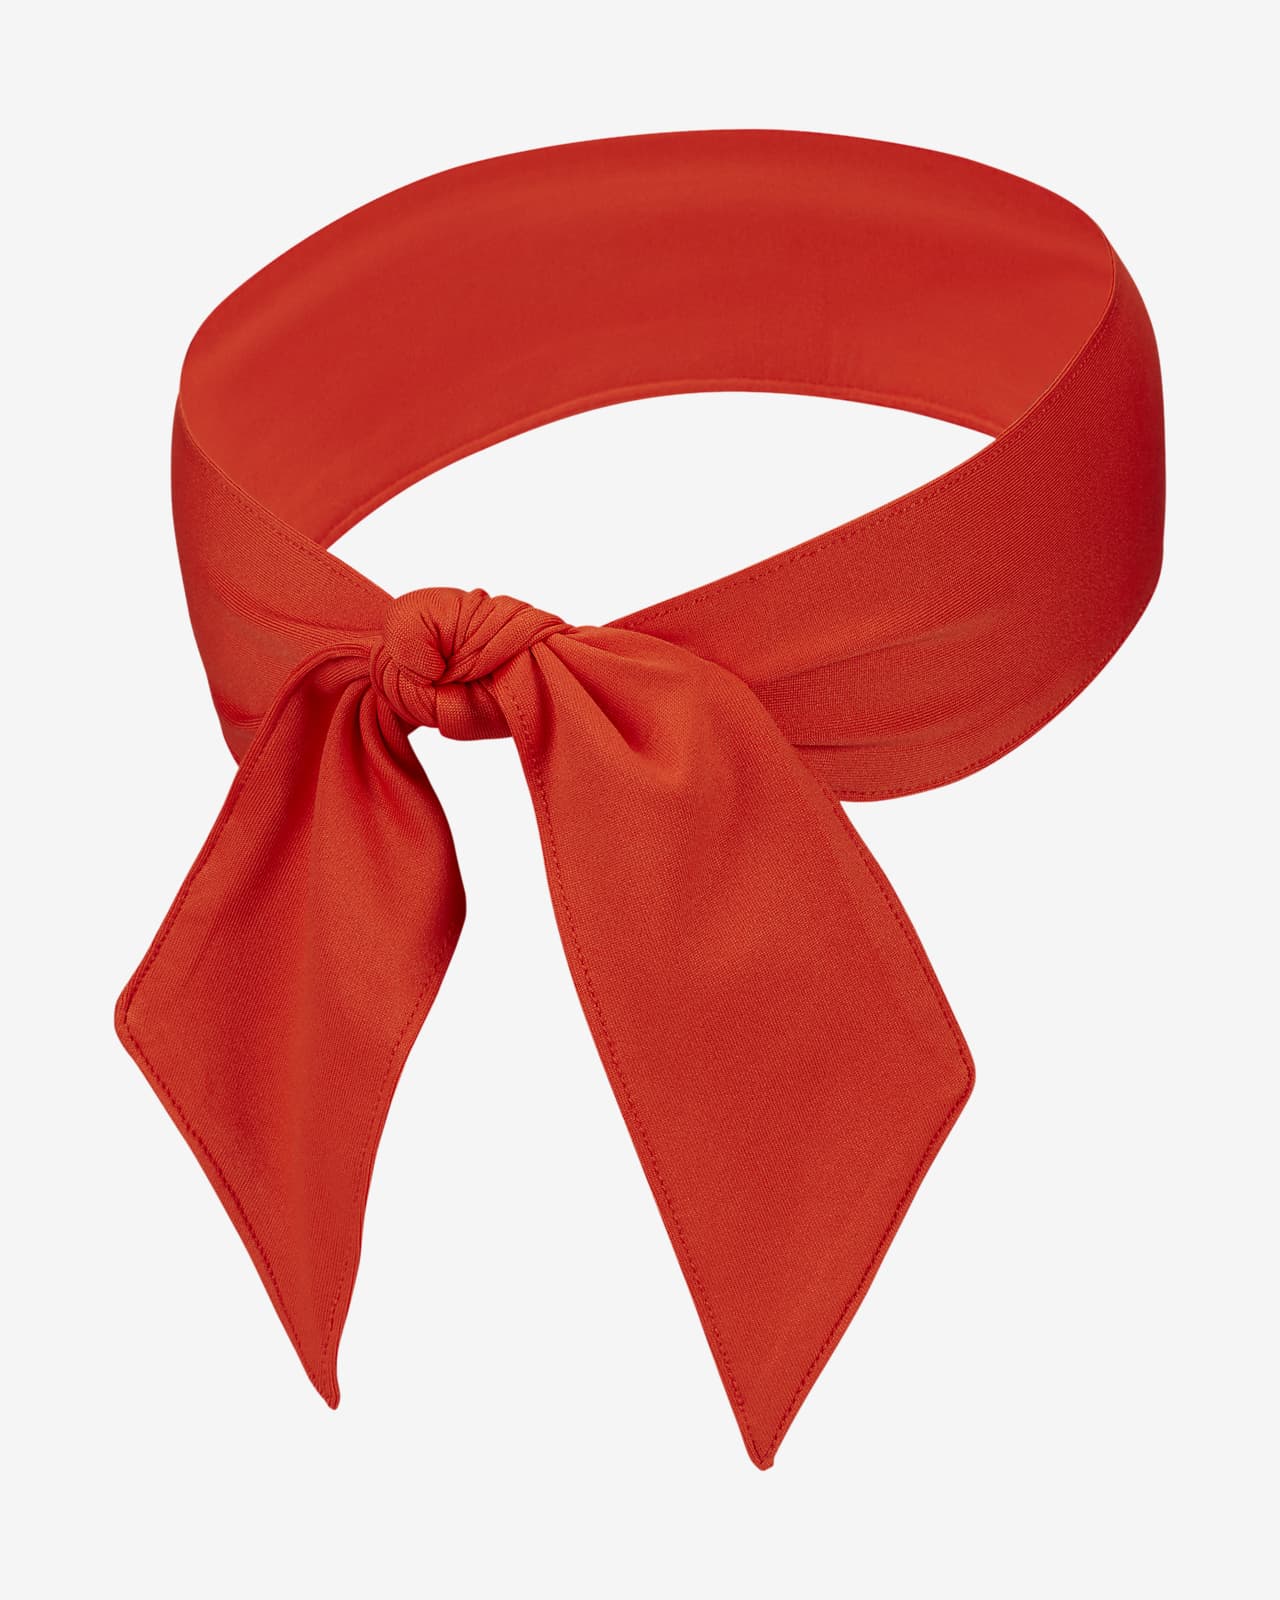 Nike Red Hair Bow